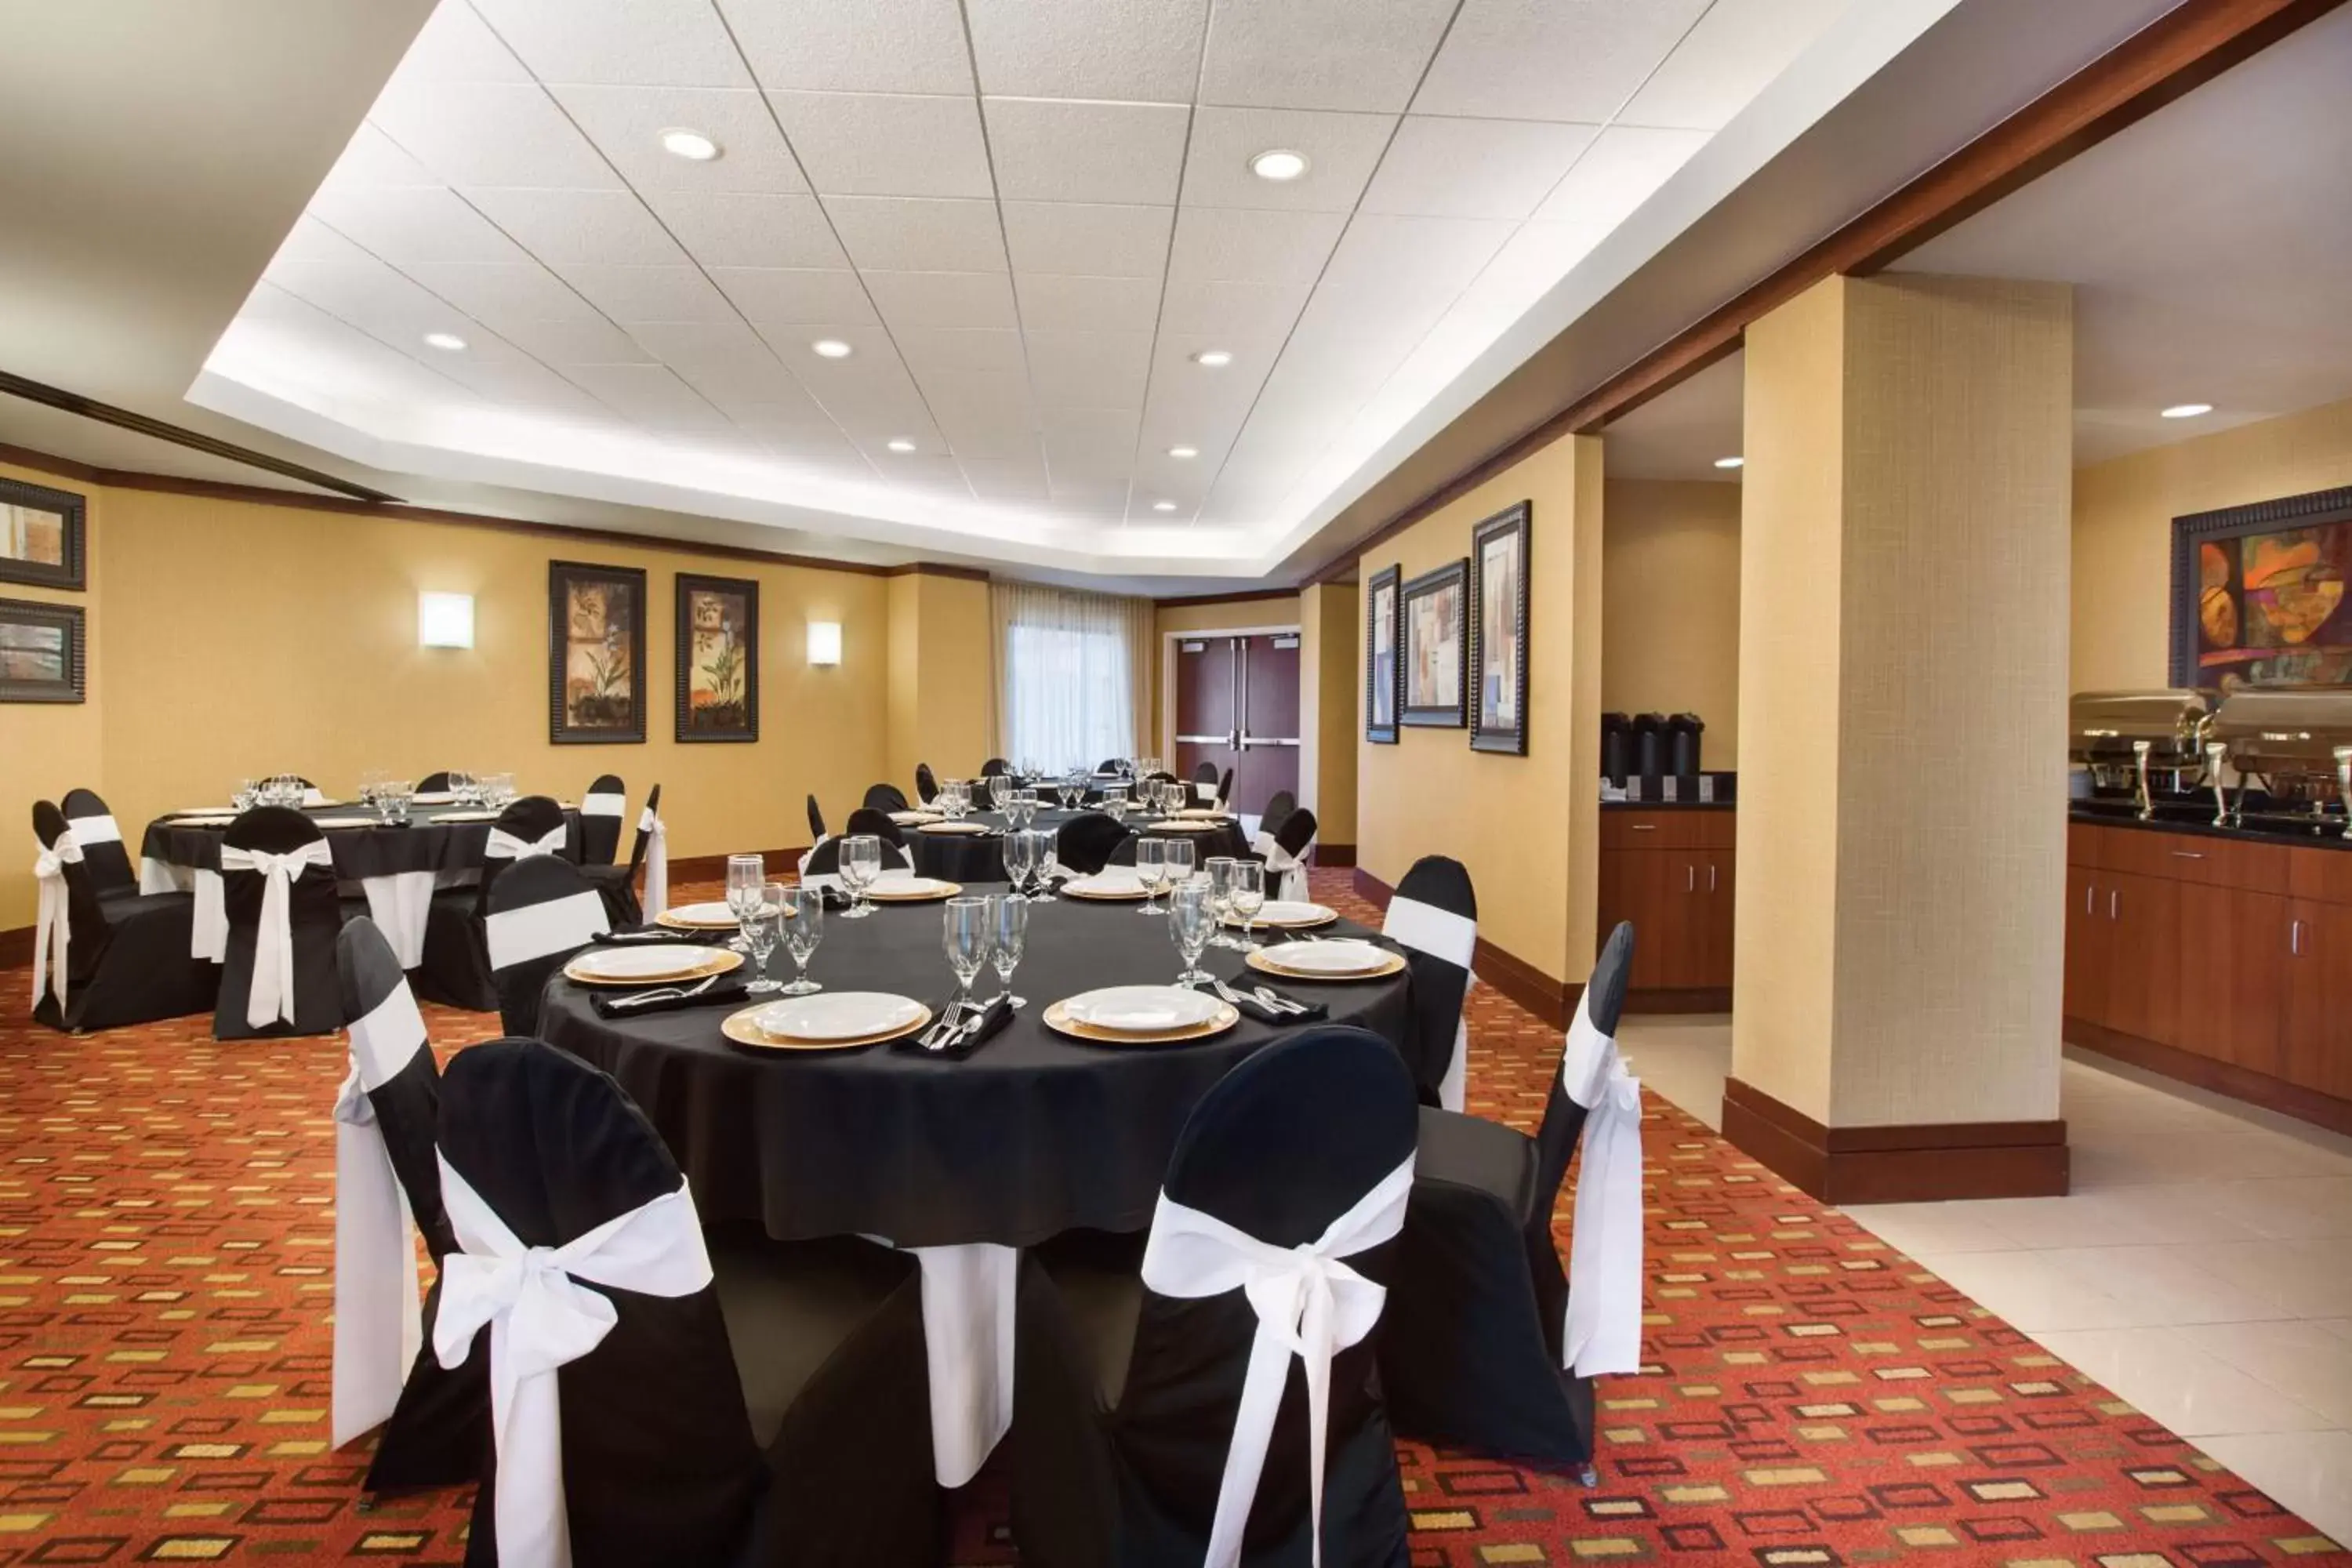 Meeting/conference room, Banquet Facilities in Courtyard by Marriott Oklahoma City Downtown